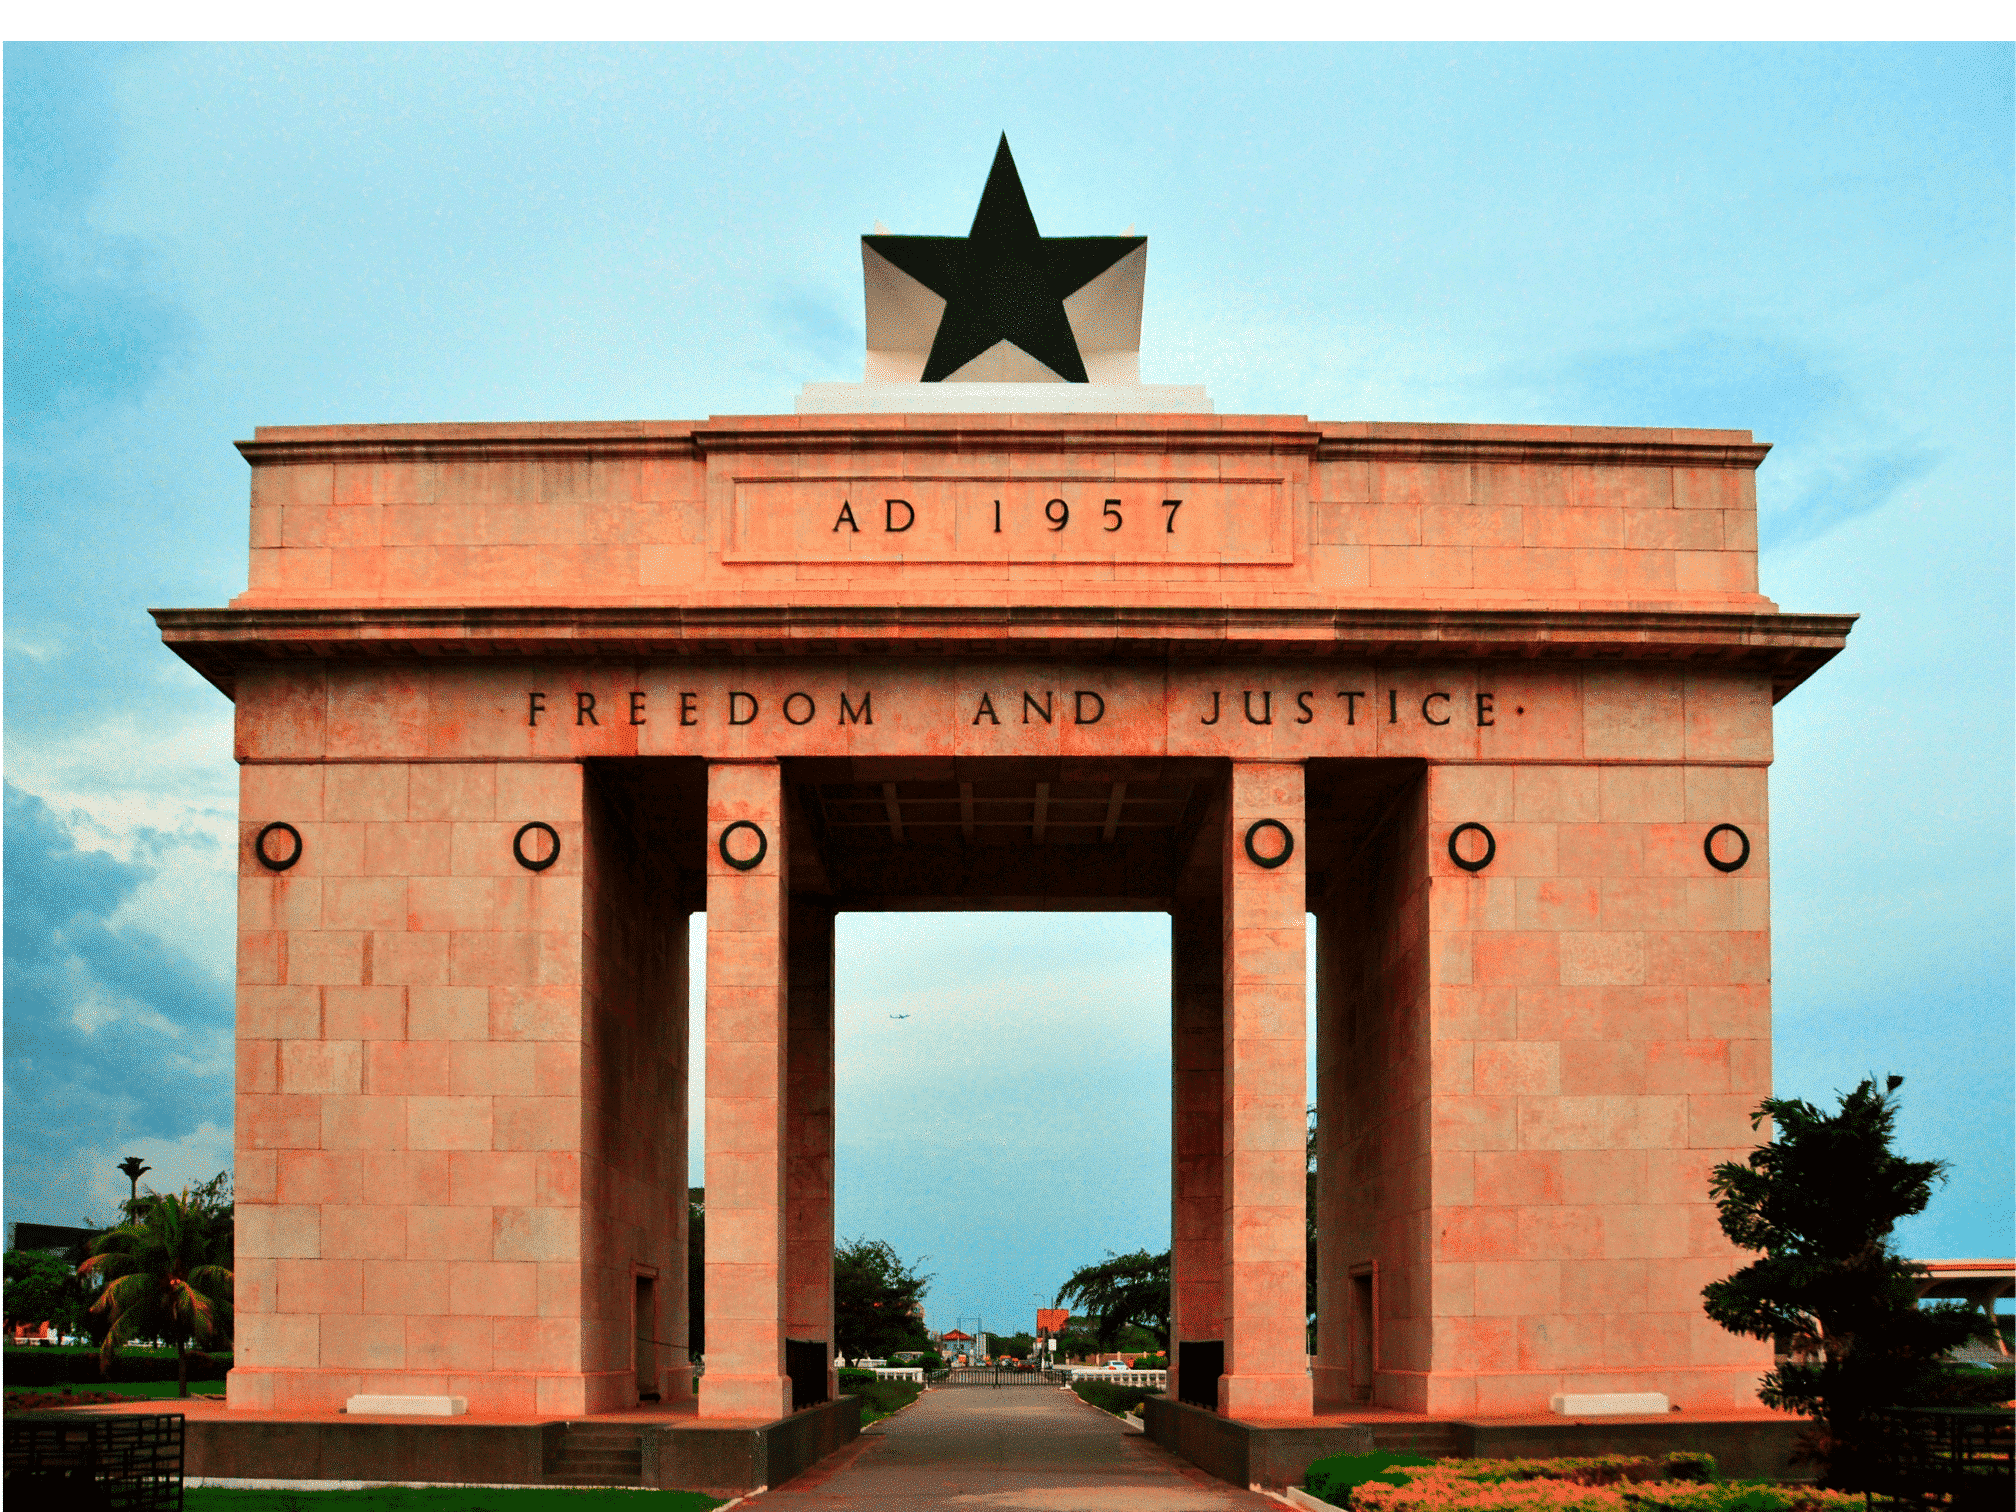 Black Star Gate - a large brick gate in Accra, Ghana with a black star at the top. The monument bears the large inscription “AD 1957” and “Freedom and Justice”.